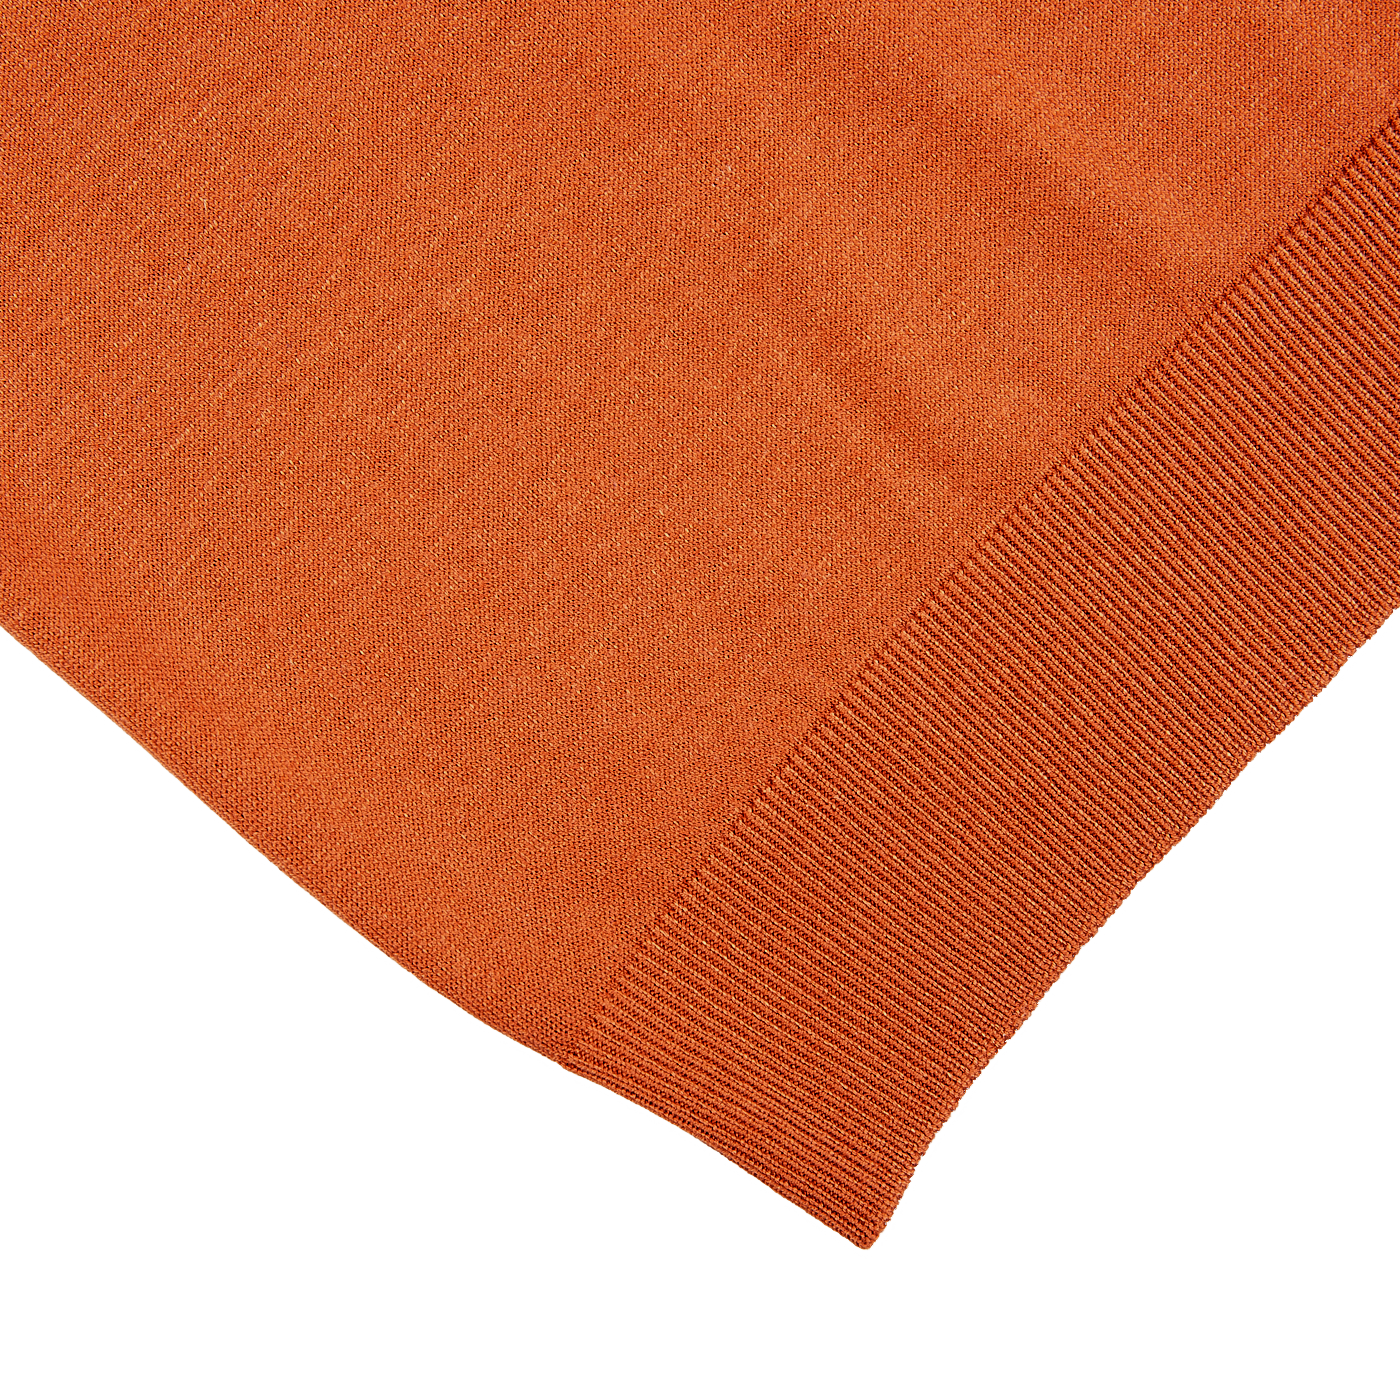 A close up of a Gran Sasso Rust Orange Knitted Silk Polo Shirt on a white surface.